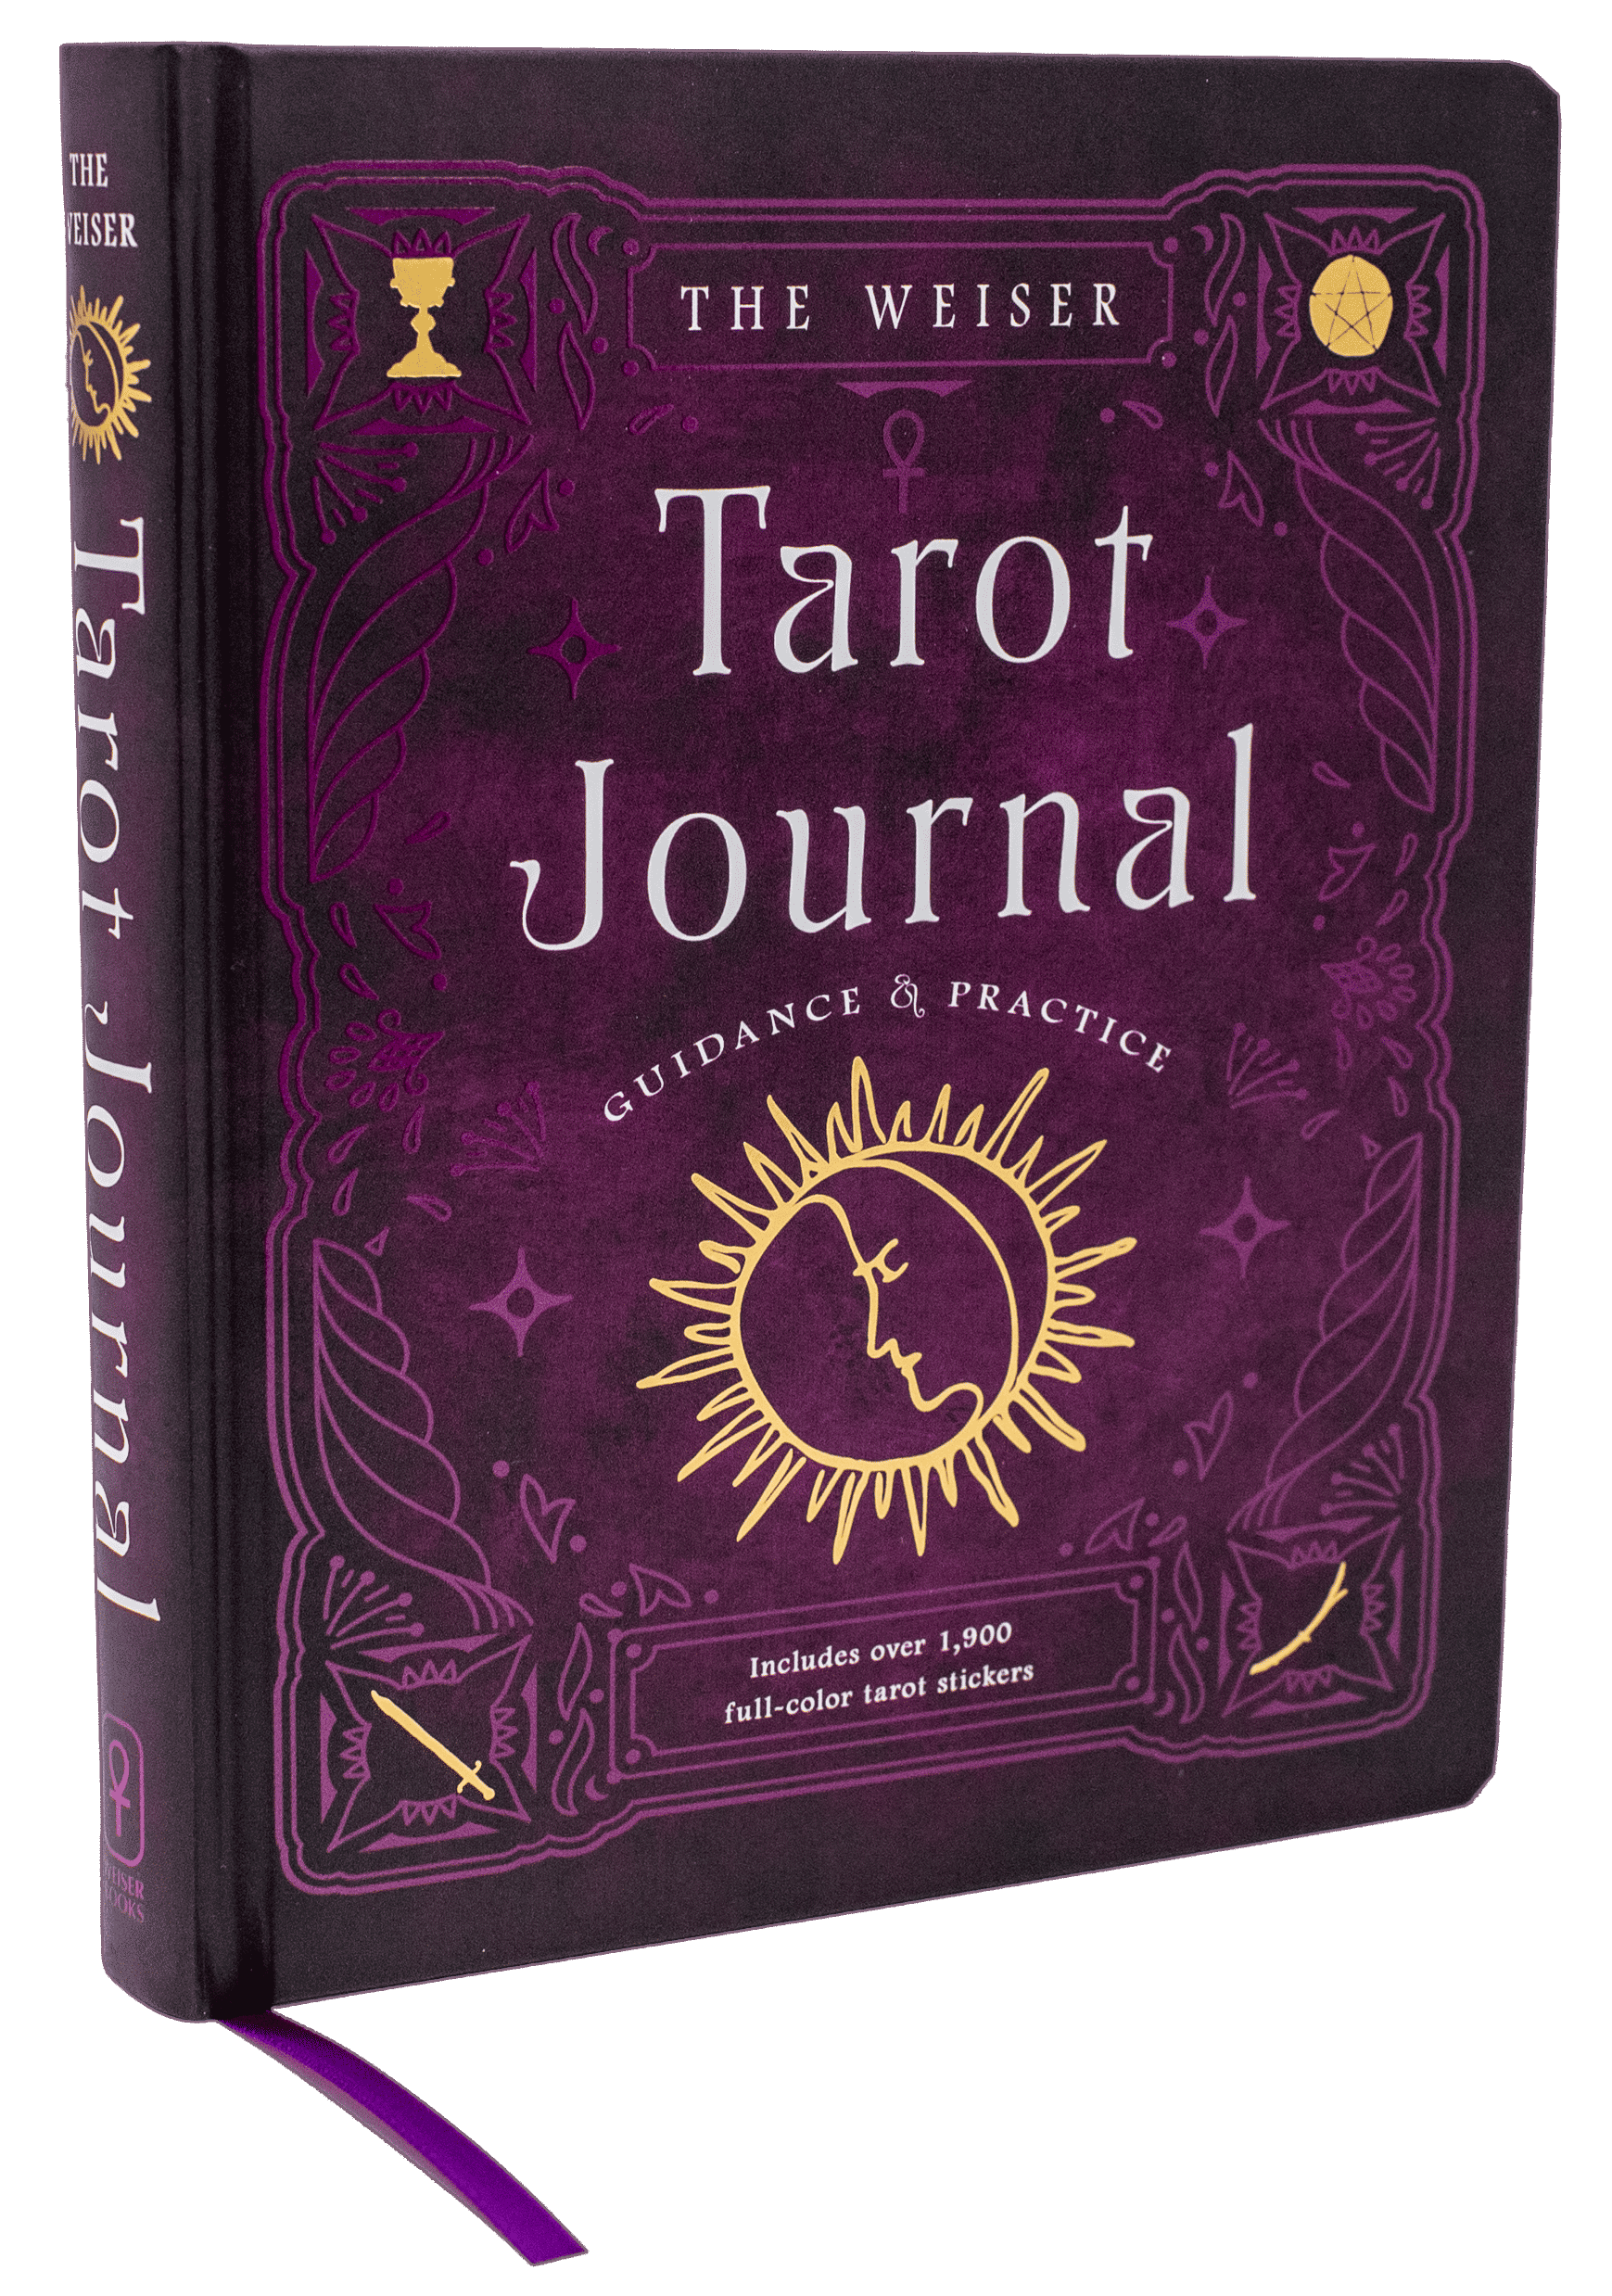 The Weiser Tarot Journal by Theresa Reed